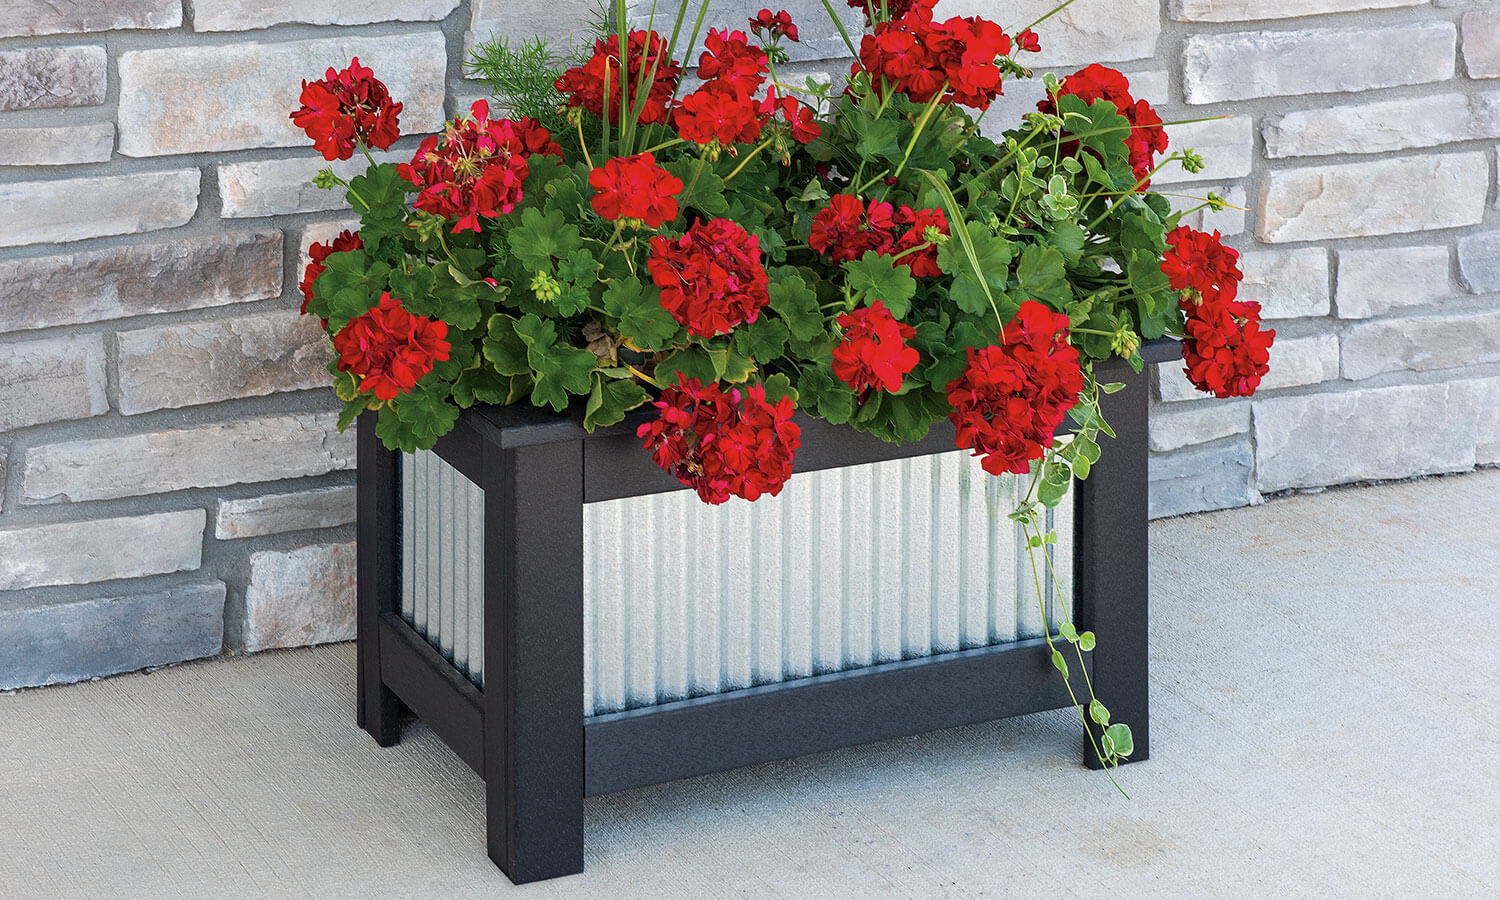 EC Woods Herb and Flower Poly Patio Planter with Metal Sides